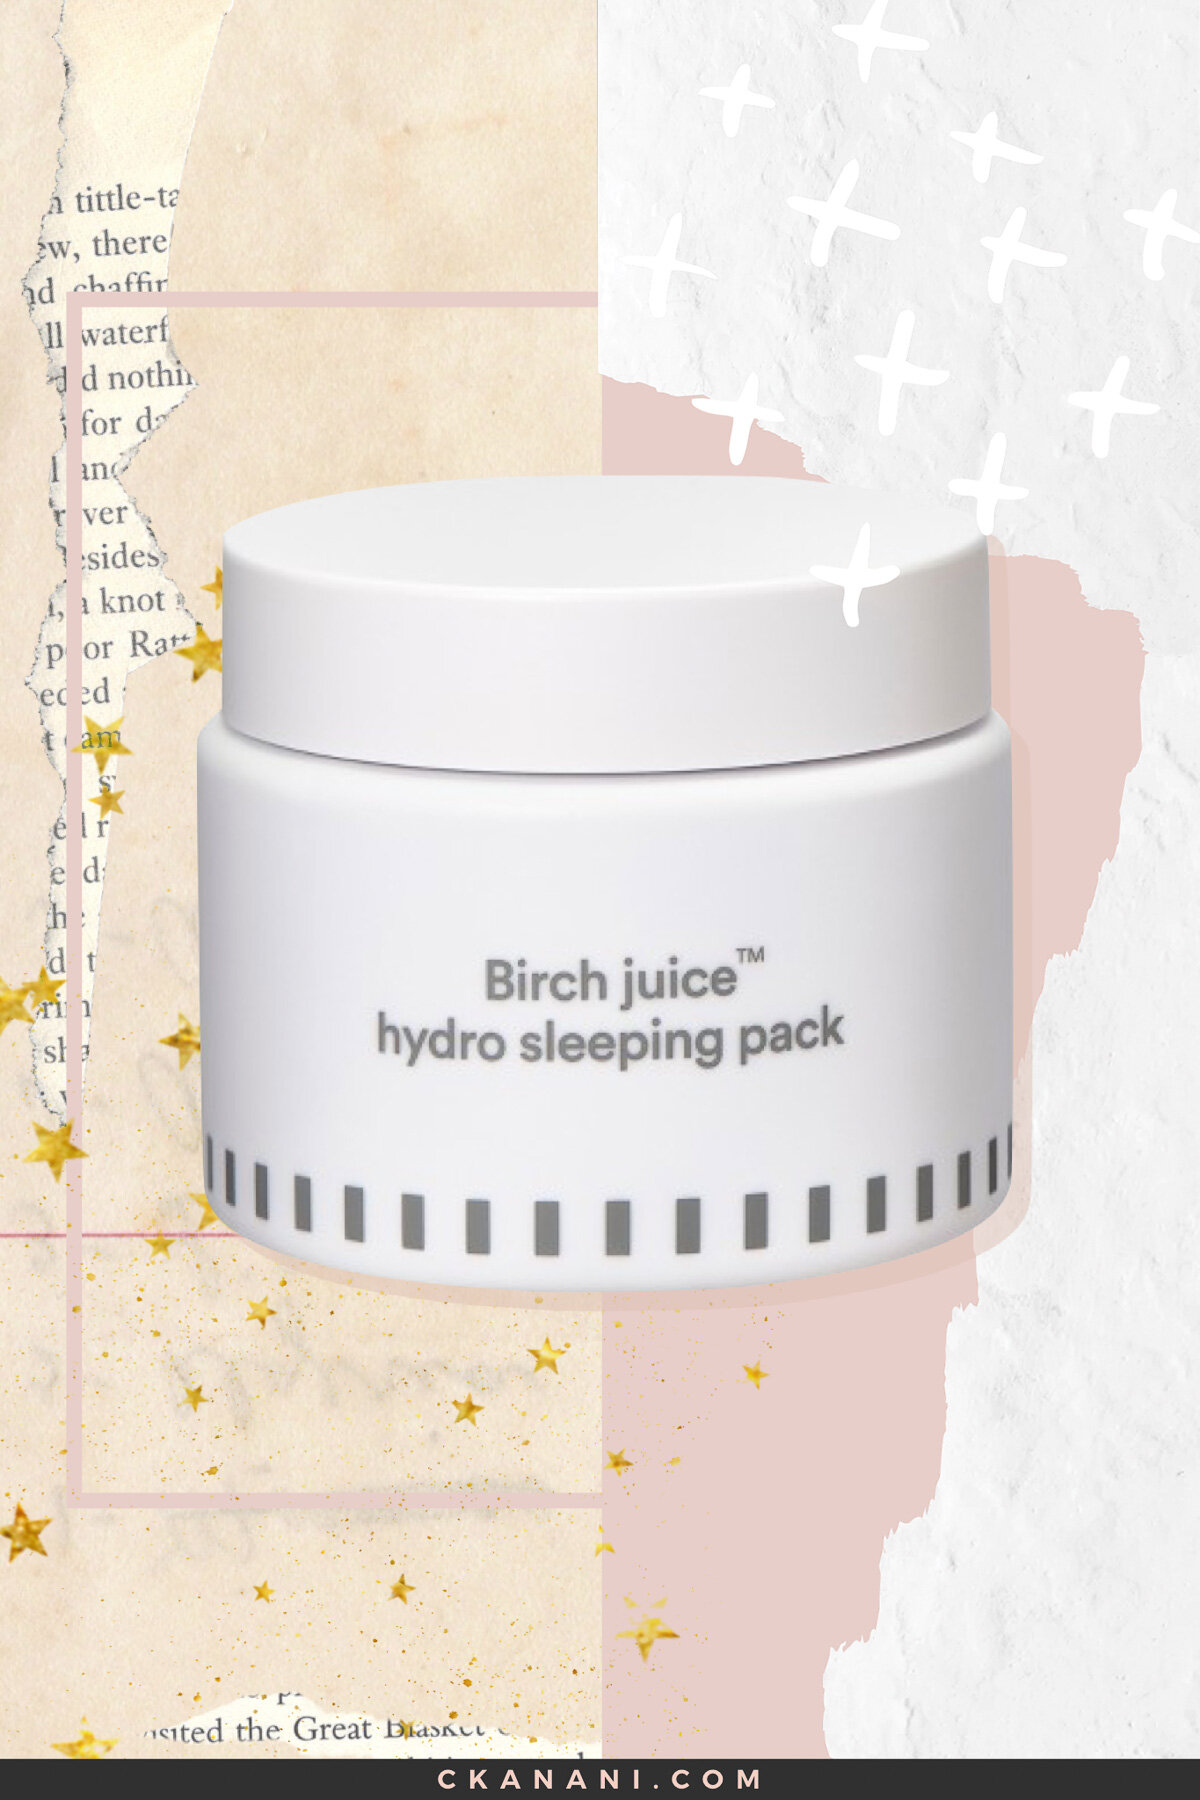 Enature Birch Juice Hydro Sleeping Pack: The Best Face Masks